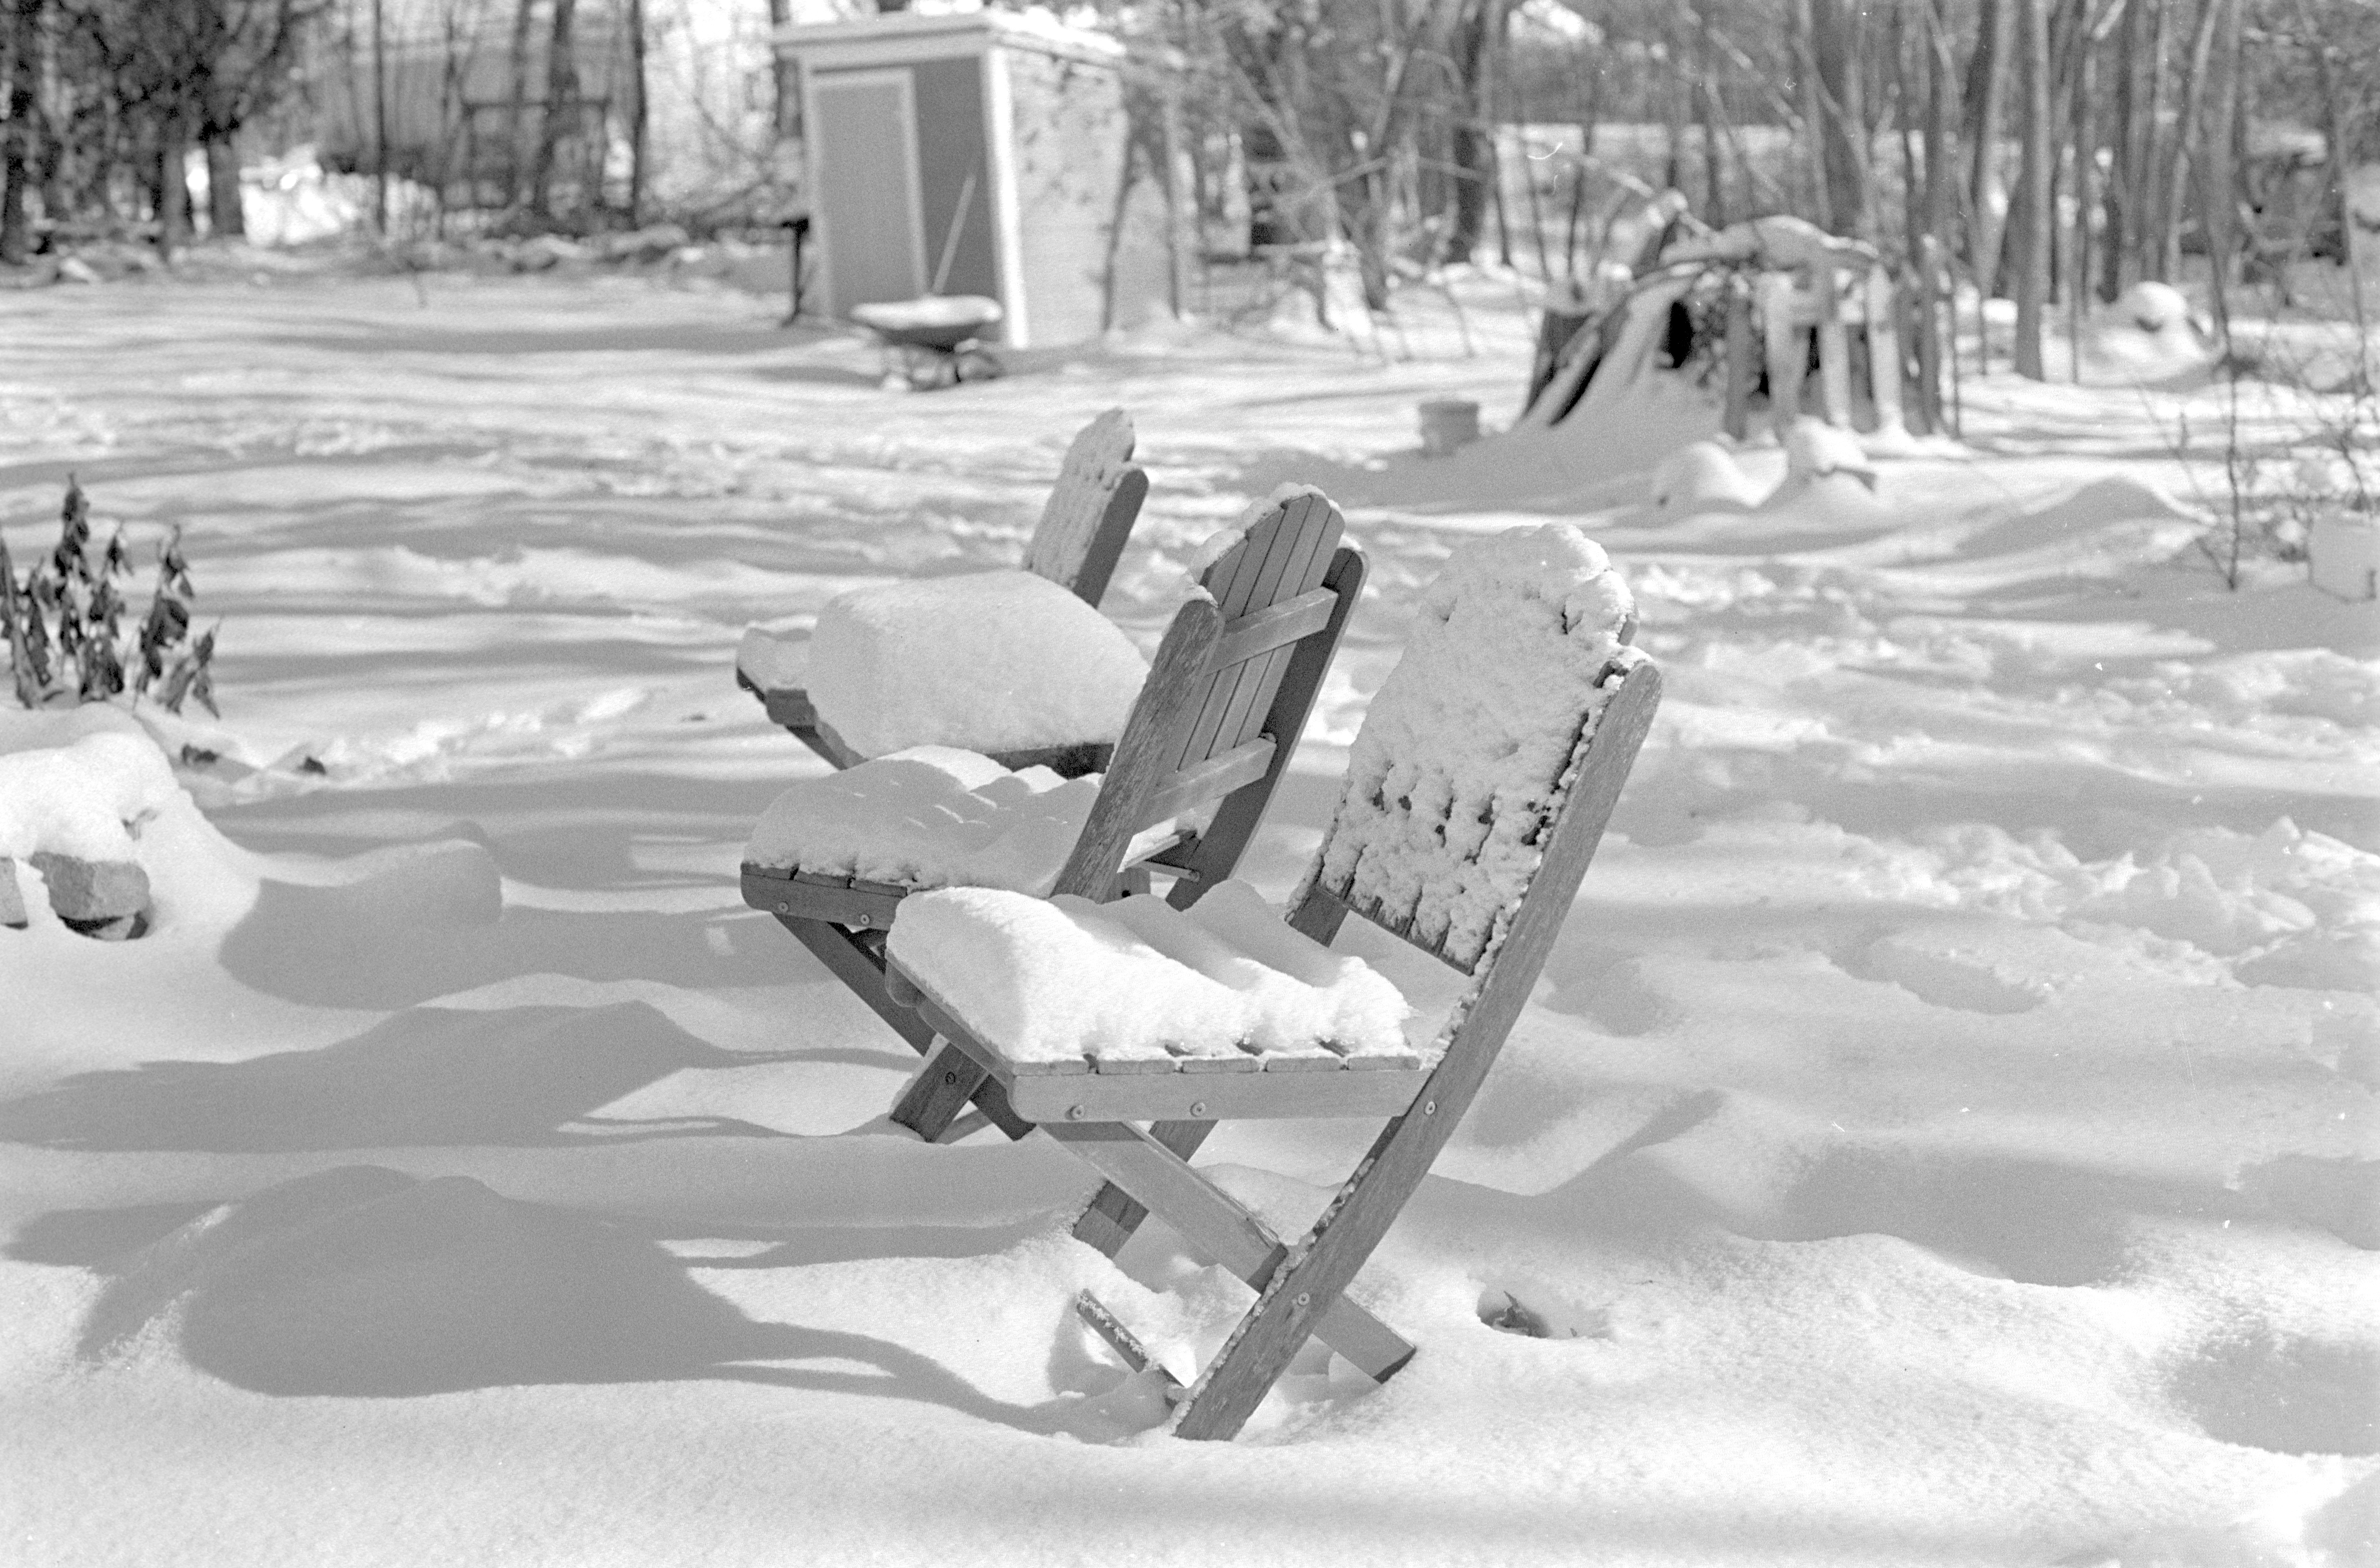 Snowy Chairs